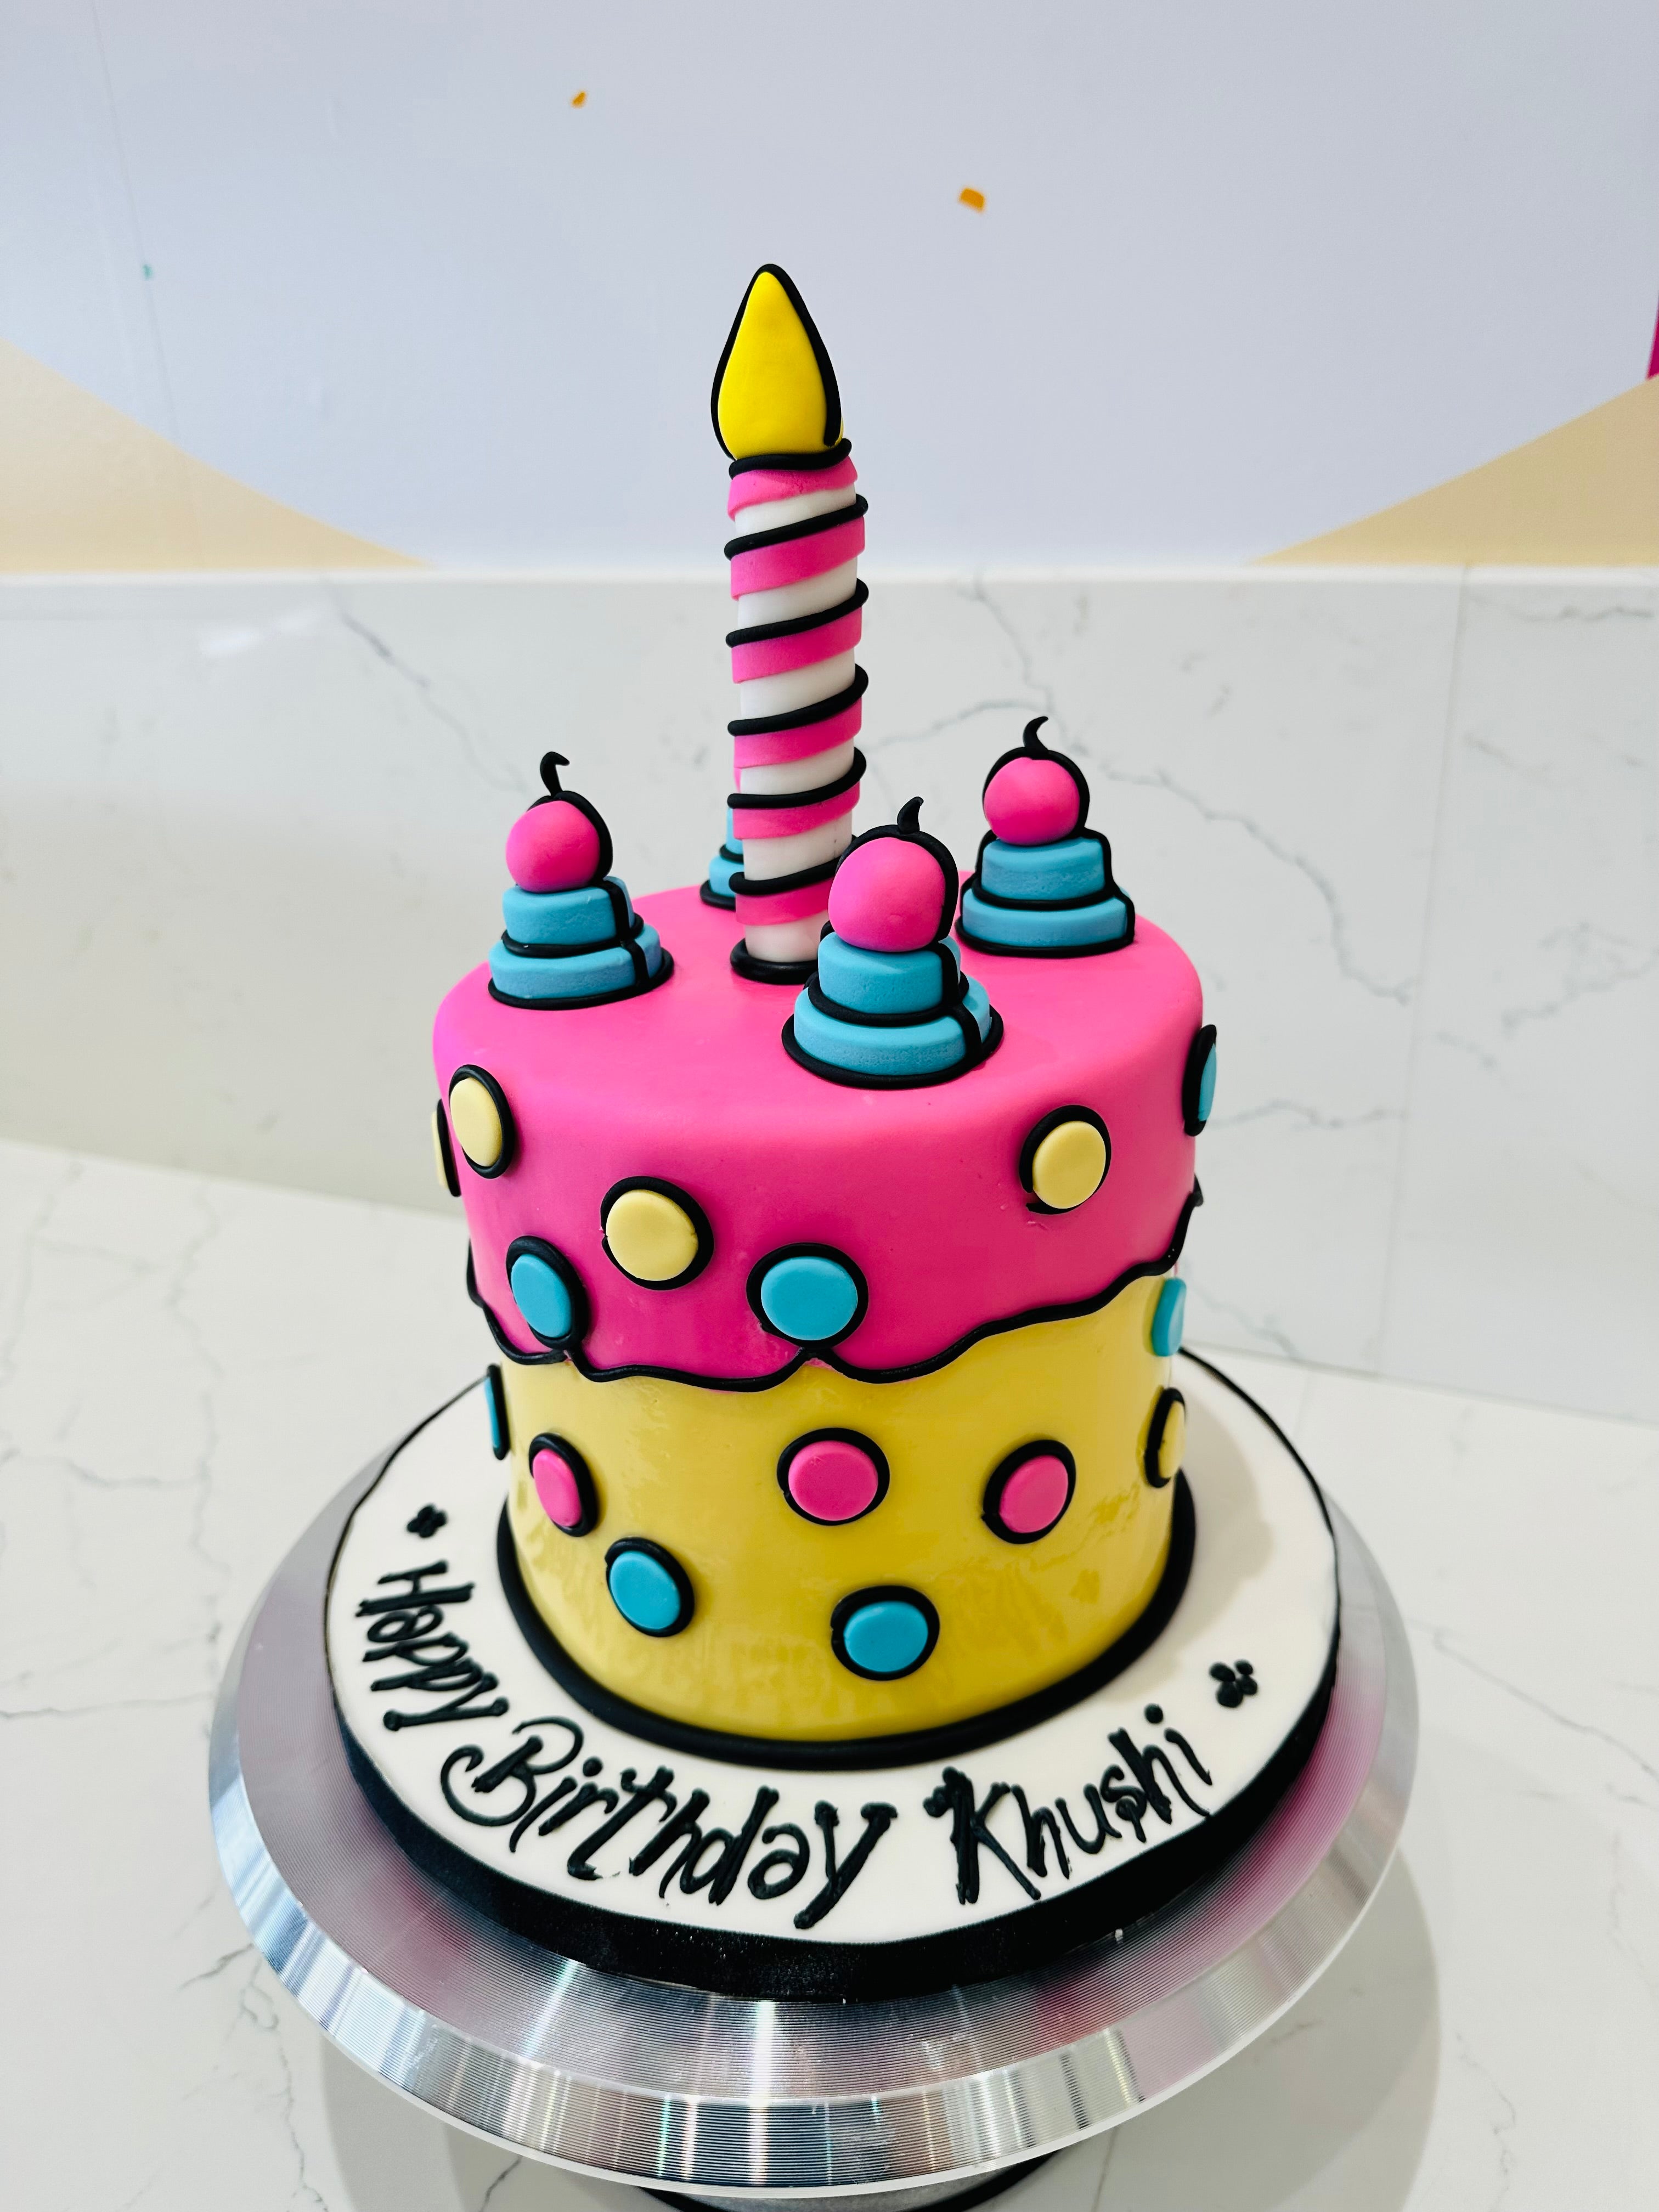 Online Cake delivery in 3 hours | Order Birthday Cakes Today| Flowera